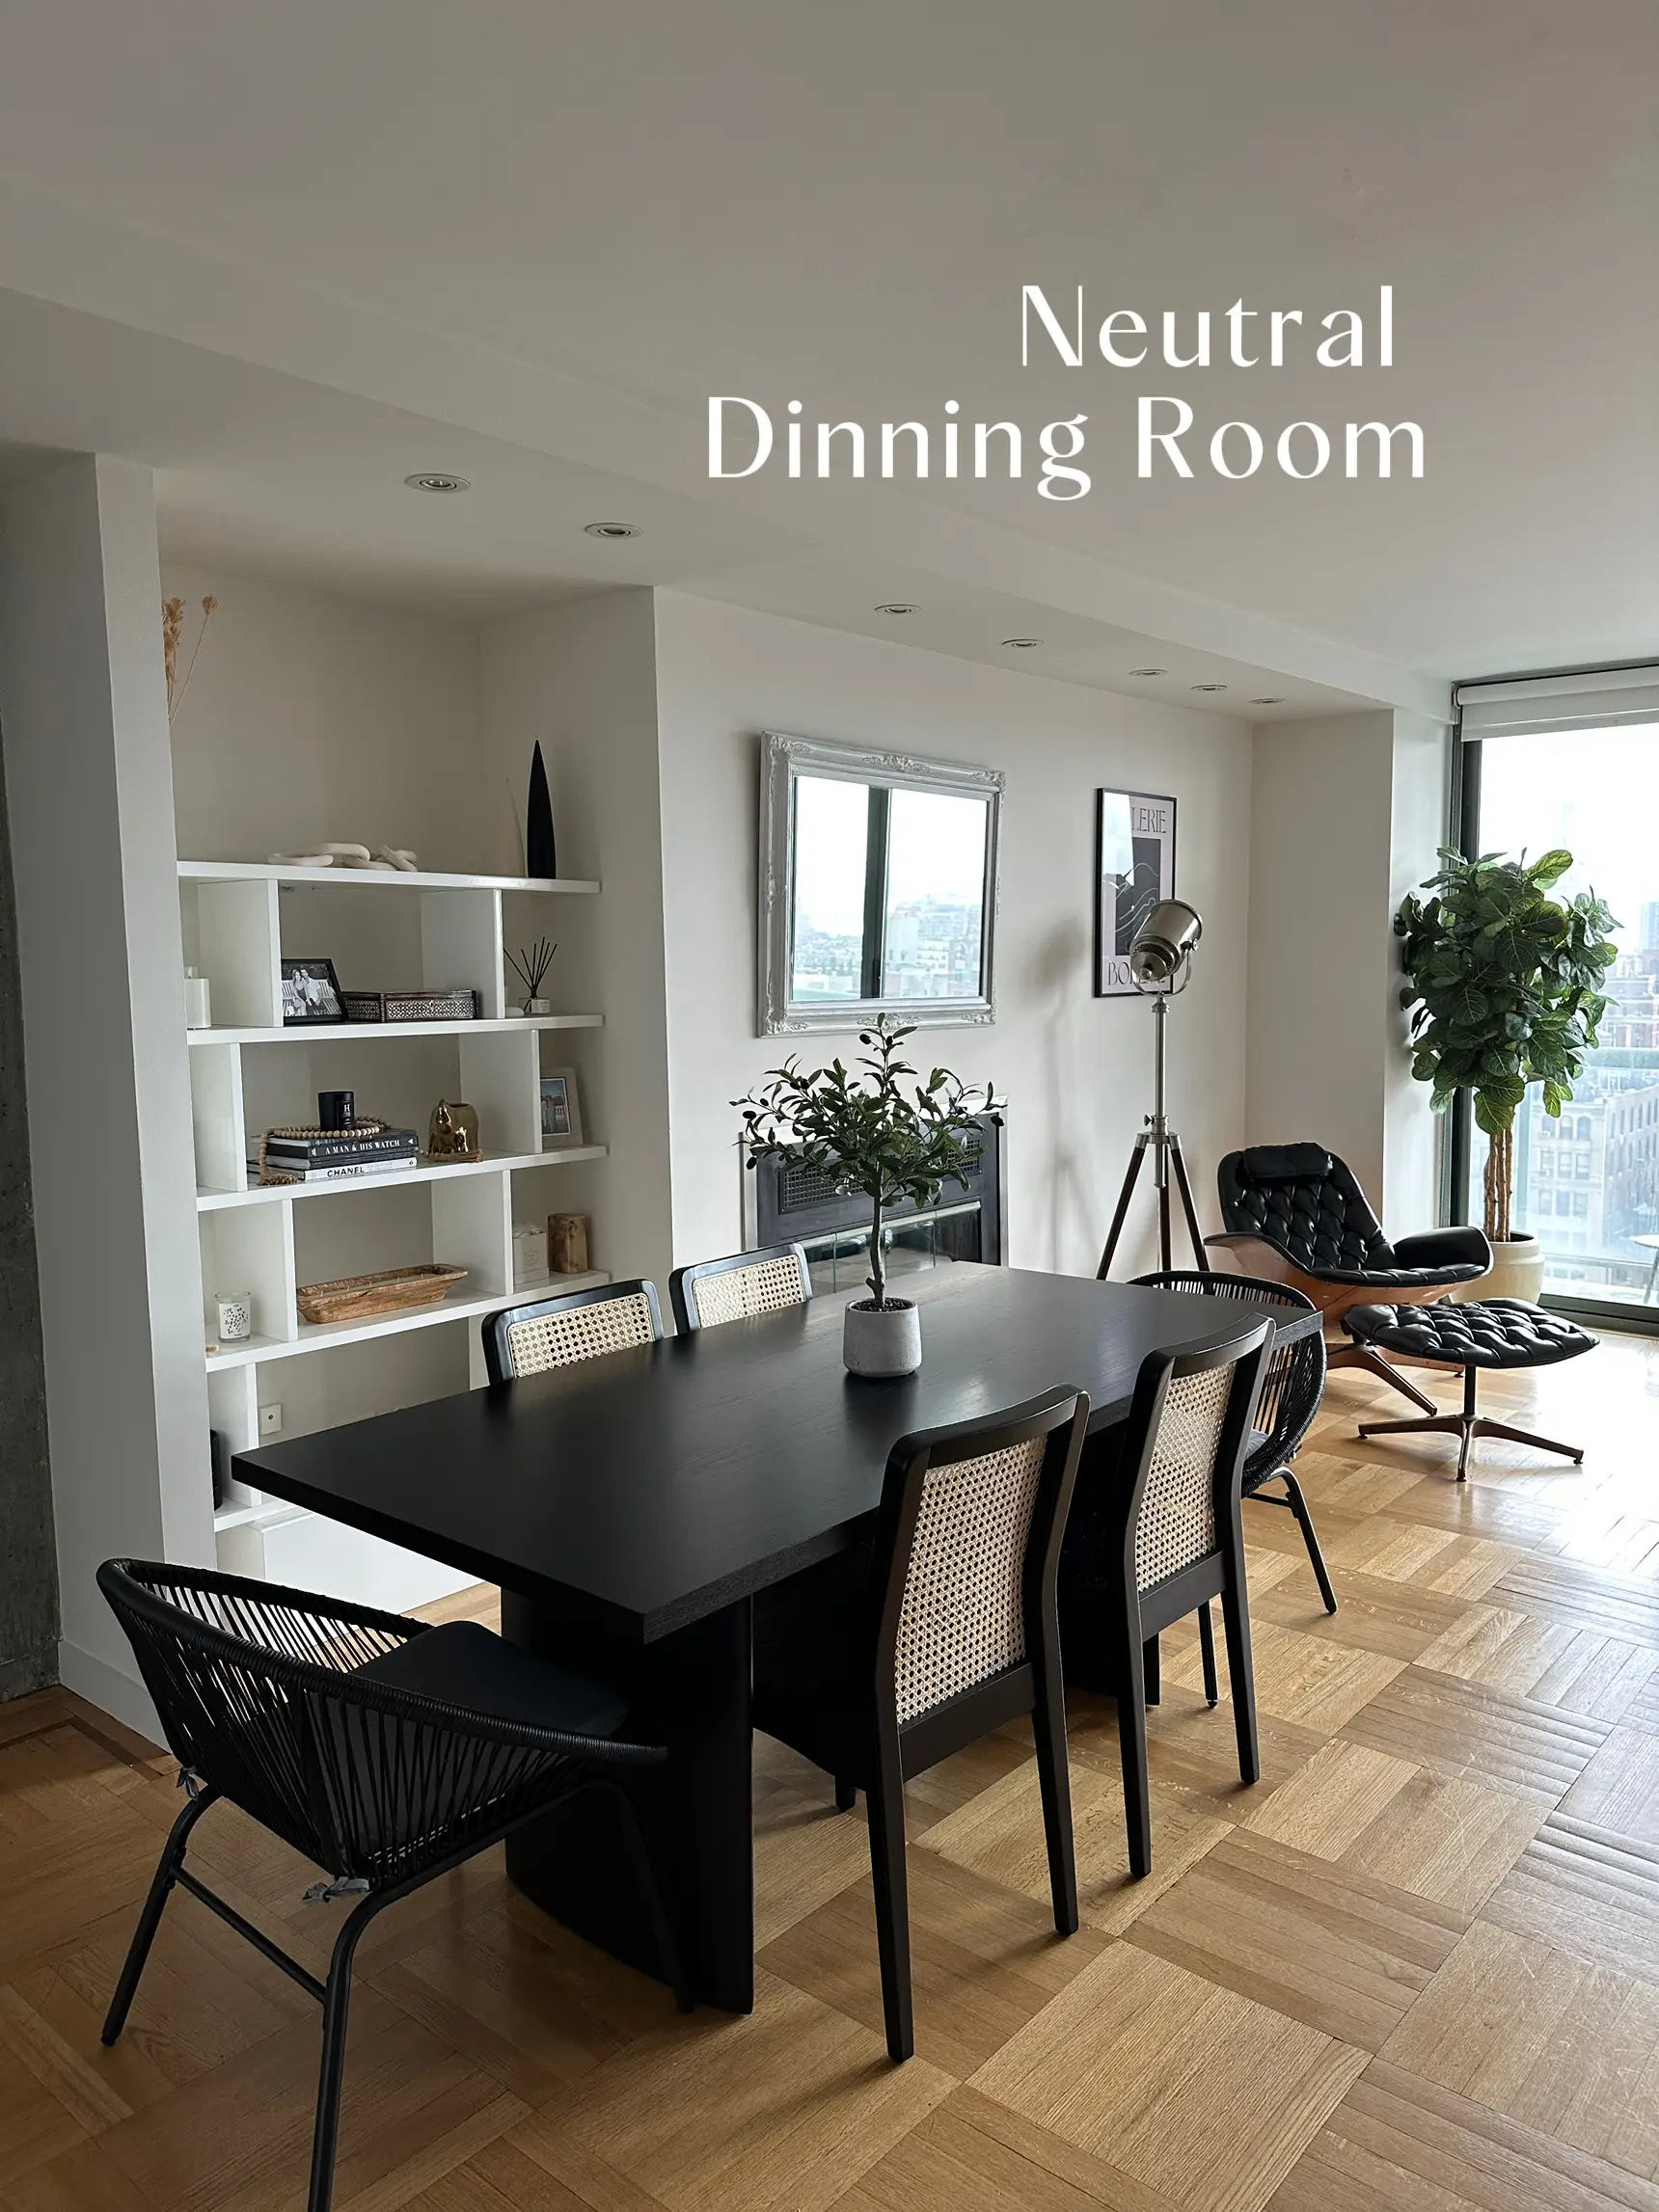 Neutral Dinning Room's images